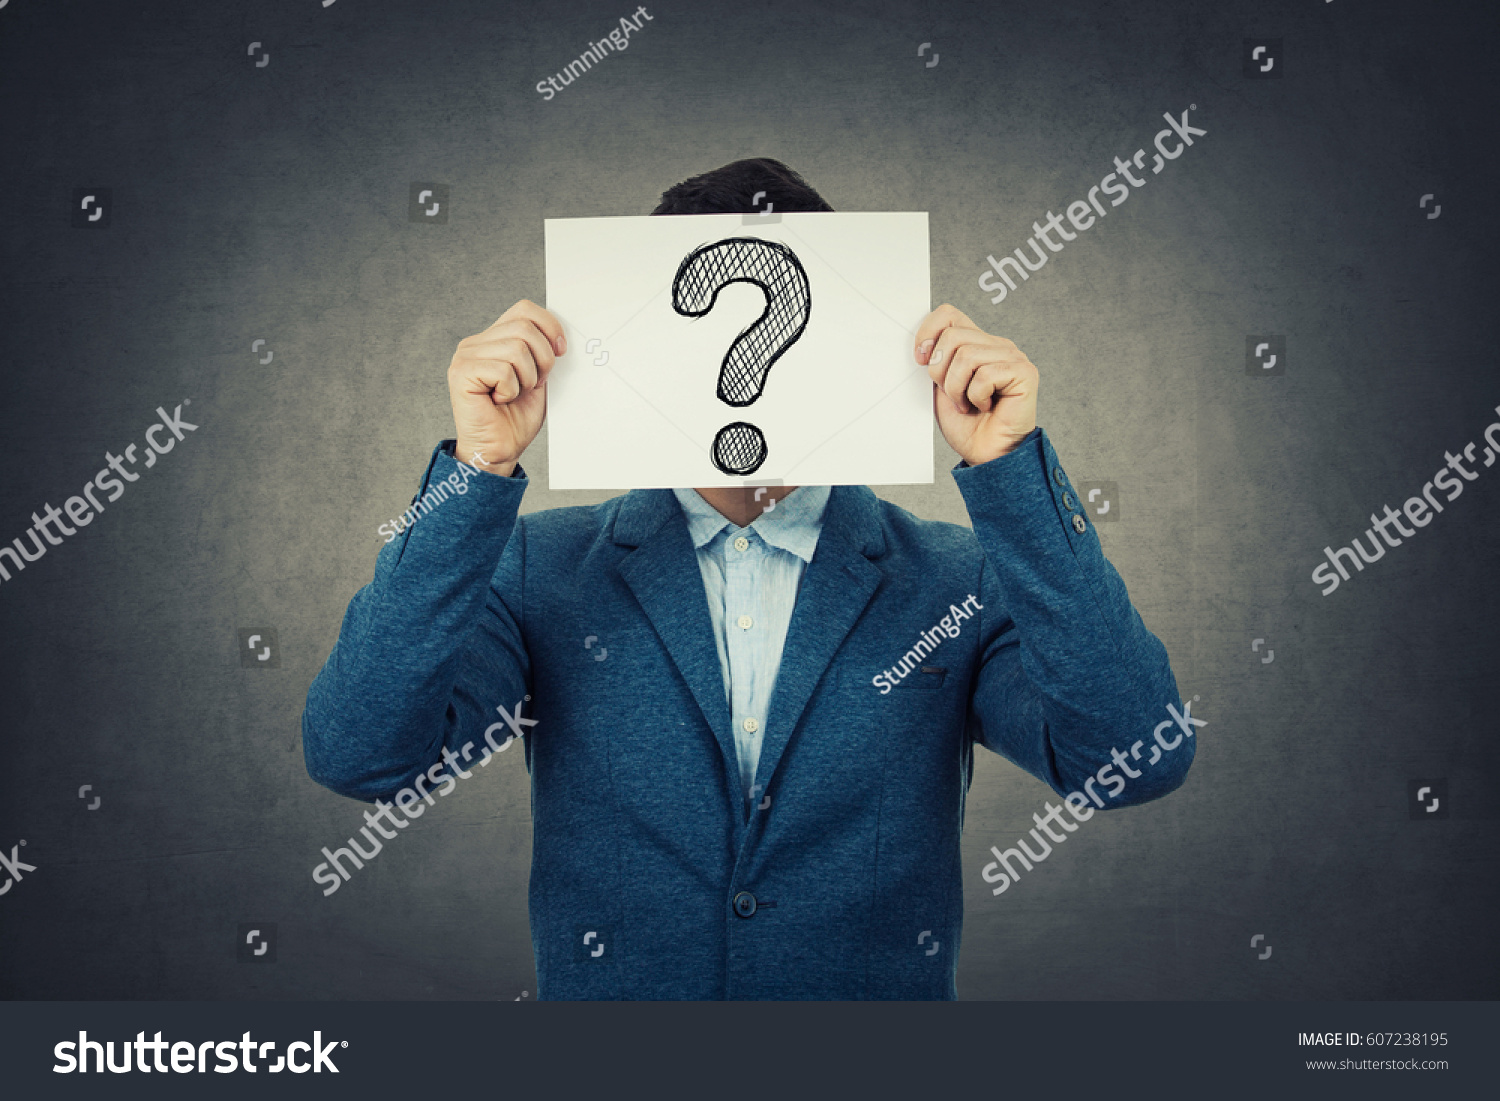 Businessman covering his face using a white paper with drawn question mark, like a mask, for hiding his identity. Isolated gray wall background. #607238195